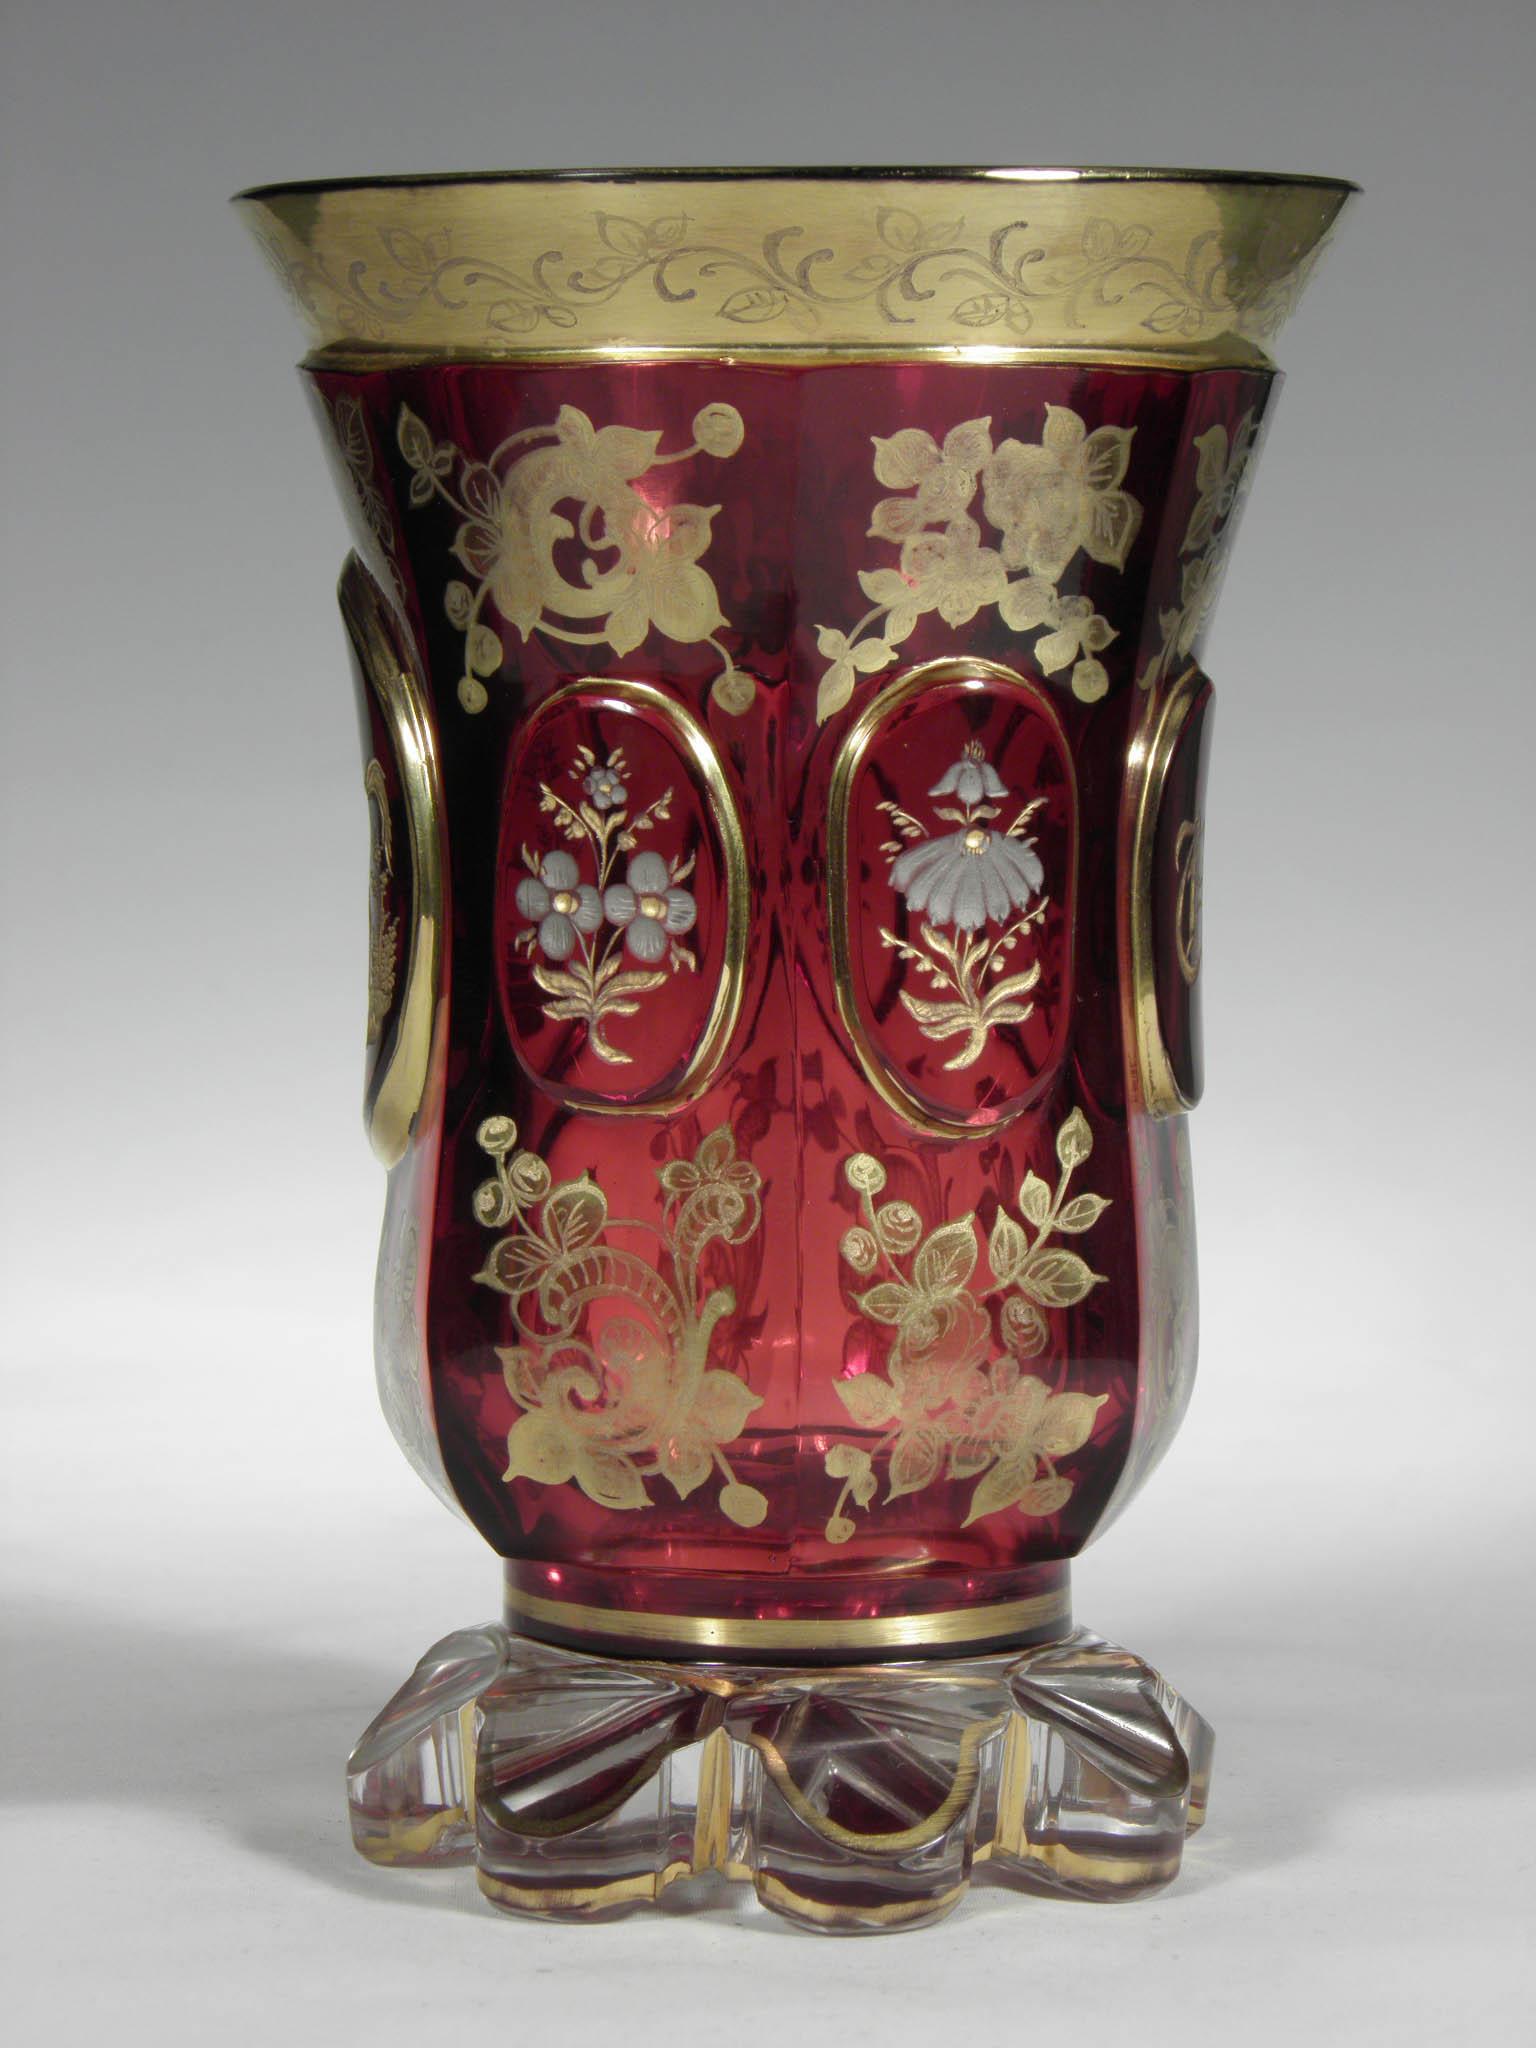 Antique Bohemian Ruby glass with horse and flower motive with initials from 19th Century.
Hand painted with gold and silver.